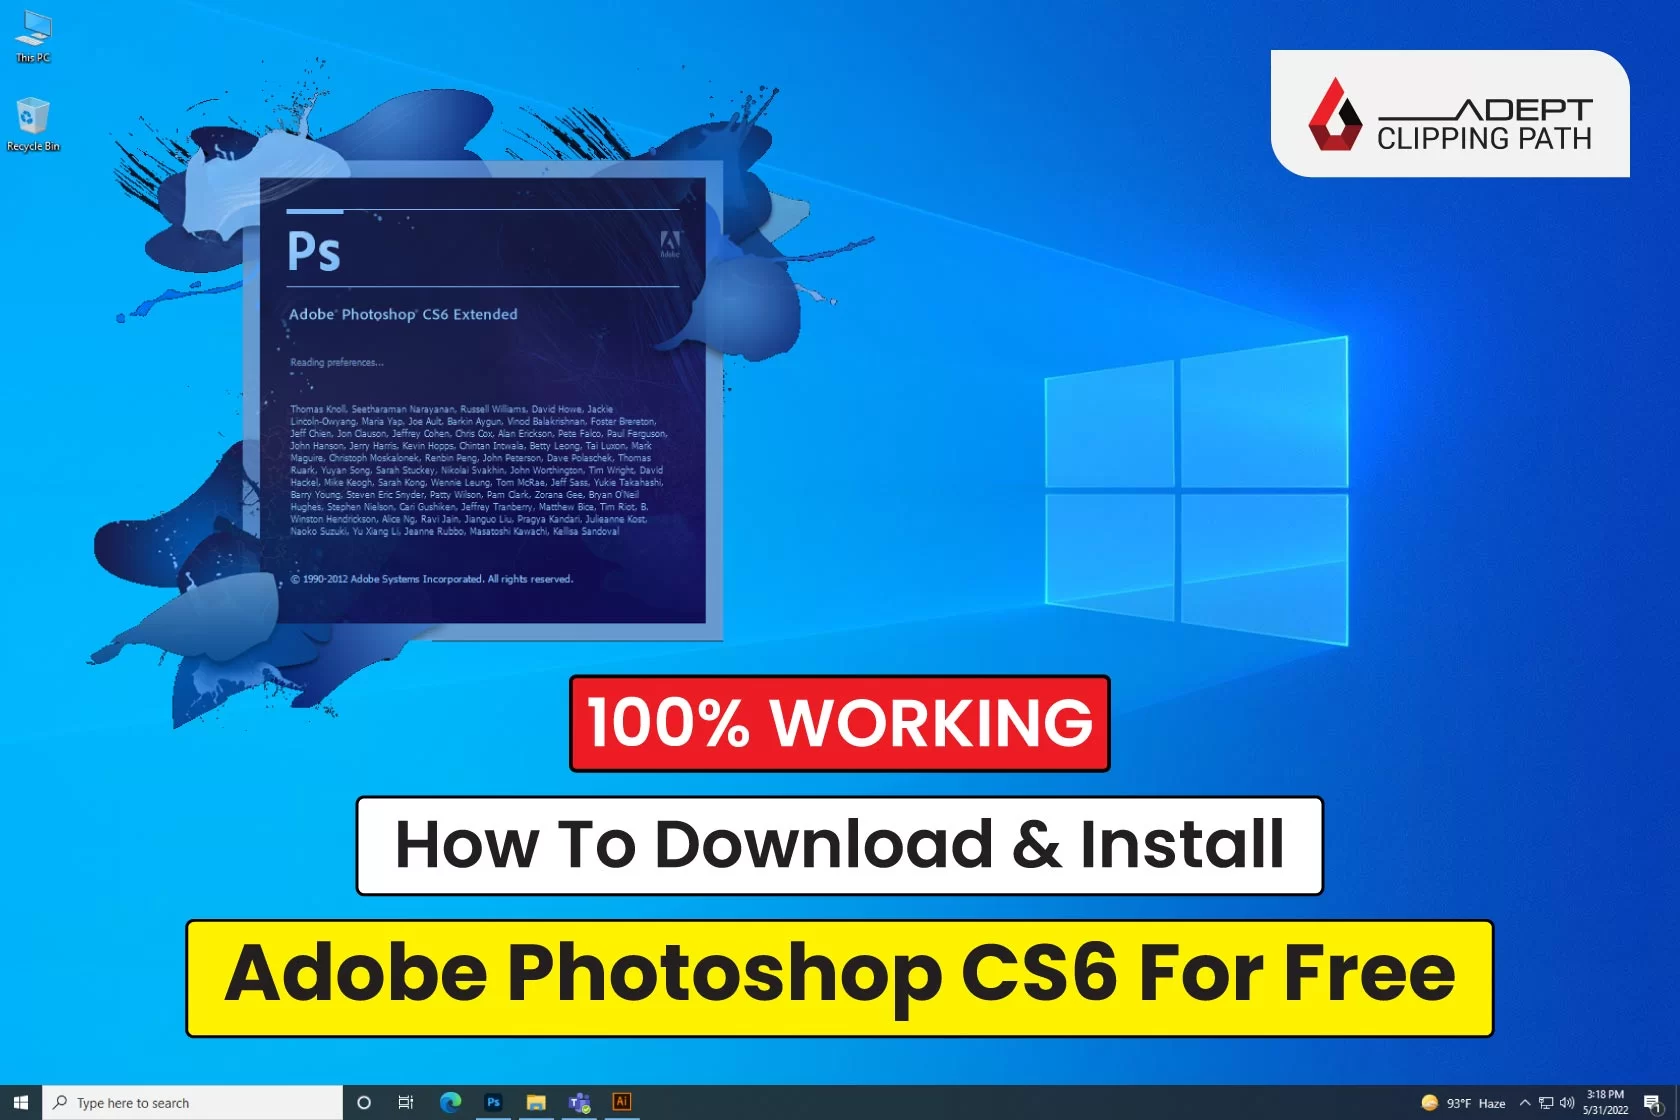 Adobe photoshop cs6 free download full version for windows 7 yt mp3 download --